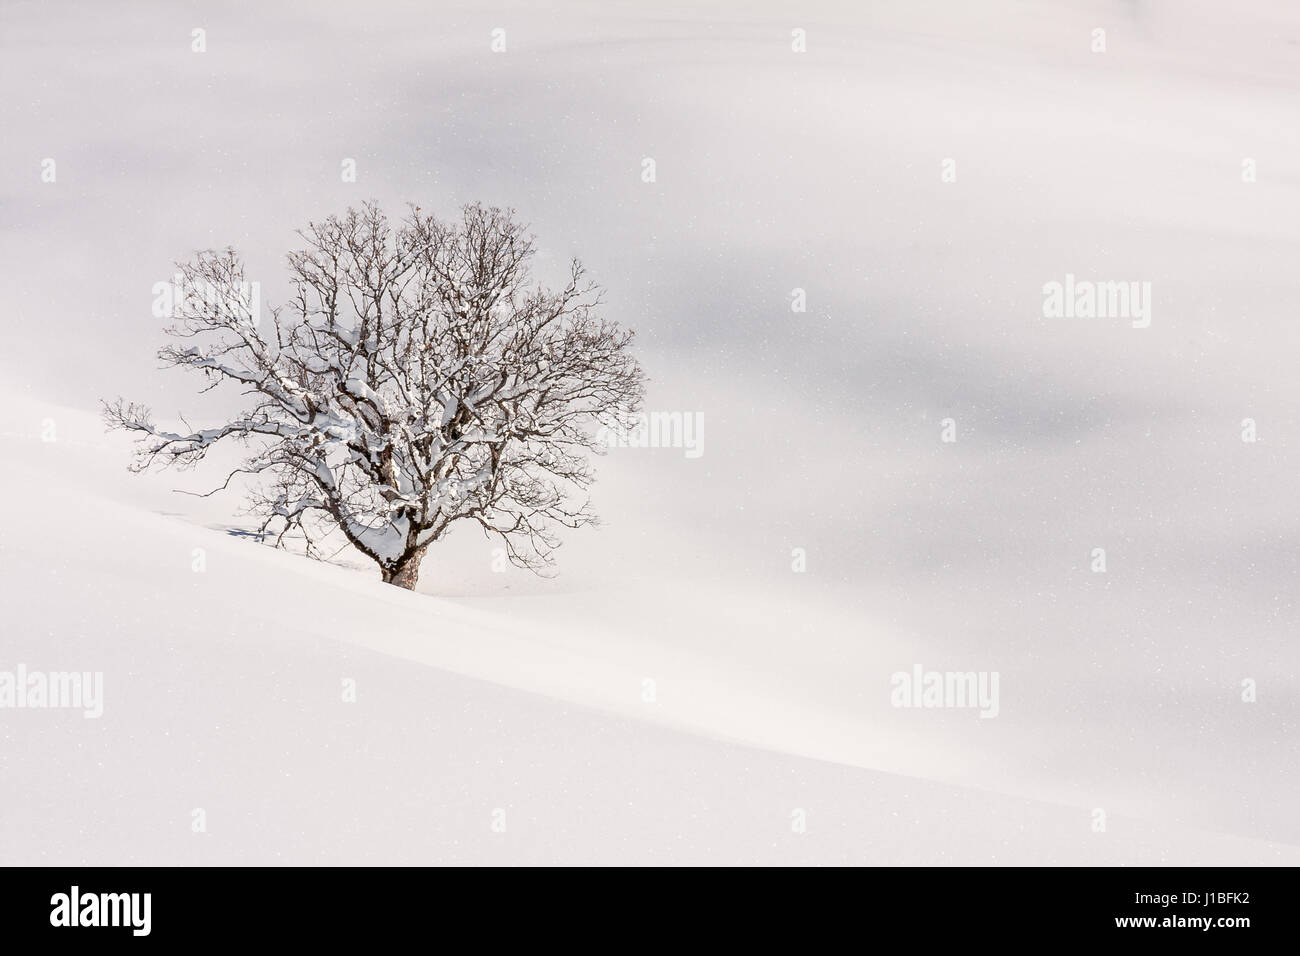 A single mountain maple tree stands in a snow covered landscape Stock Photo